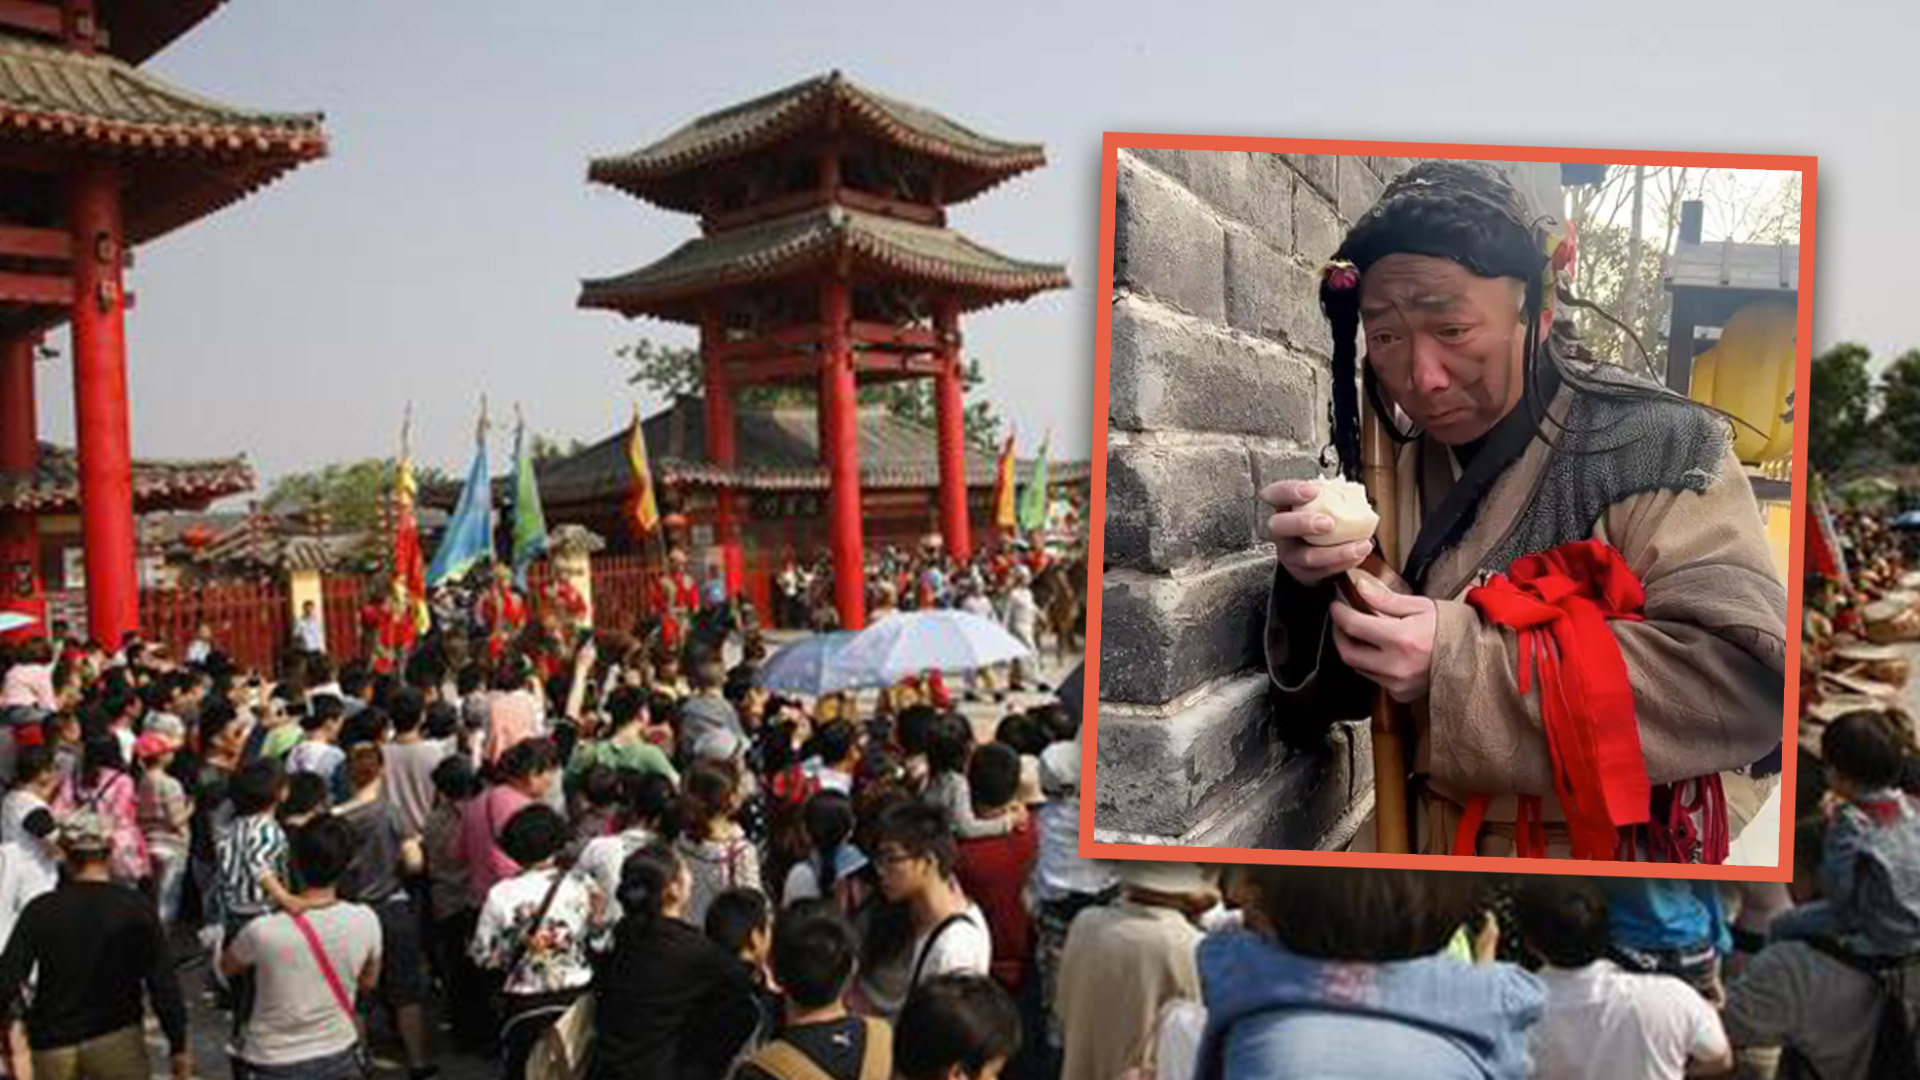 An actor employed to pretend he is a beggar at a historical theme park in China has honed his skills so much that visitors think he is the real thing. Photo: SCMP composite/Sina/Baidu